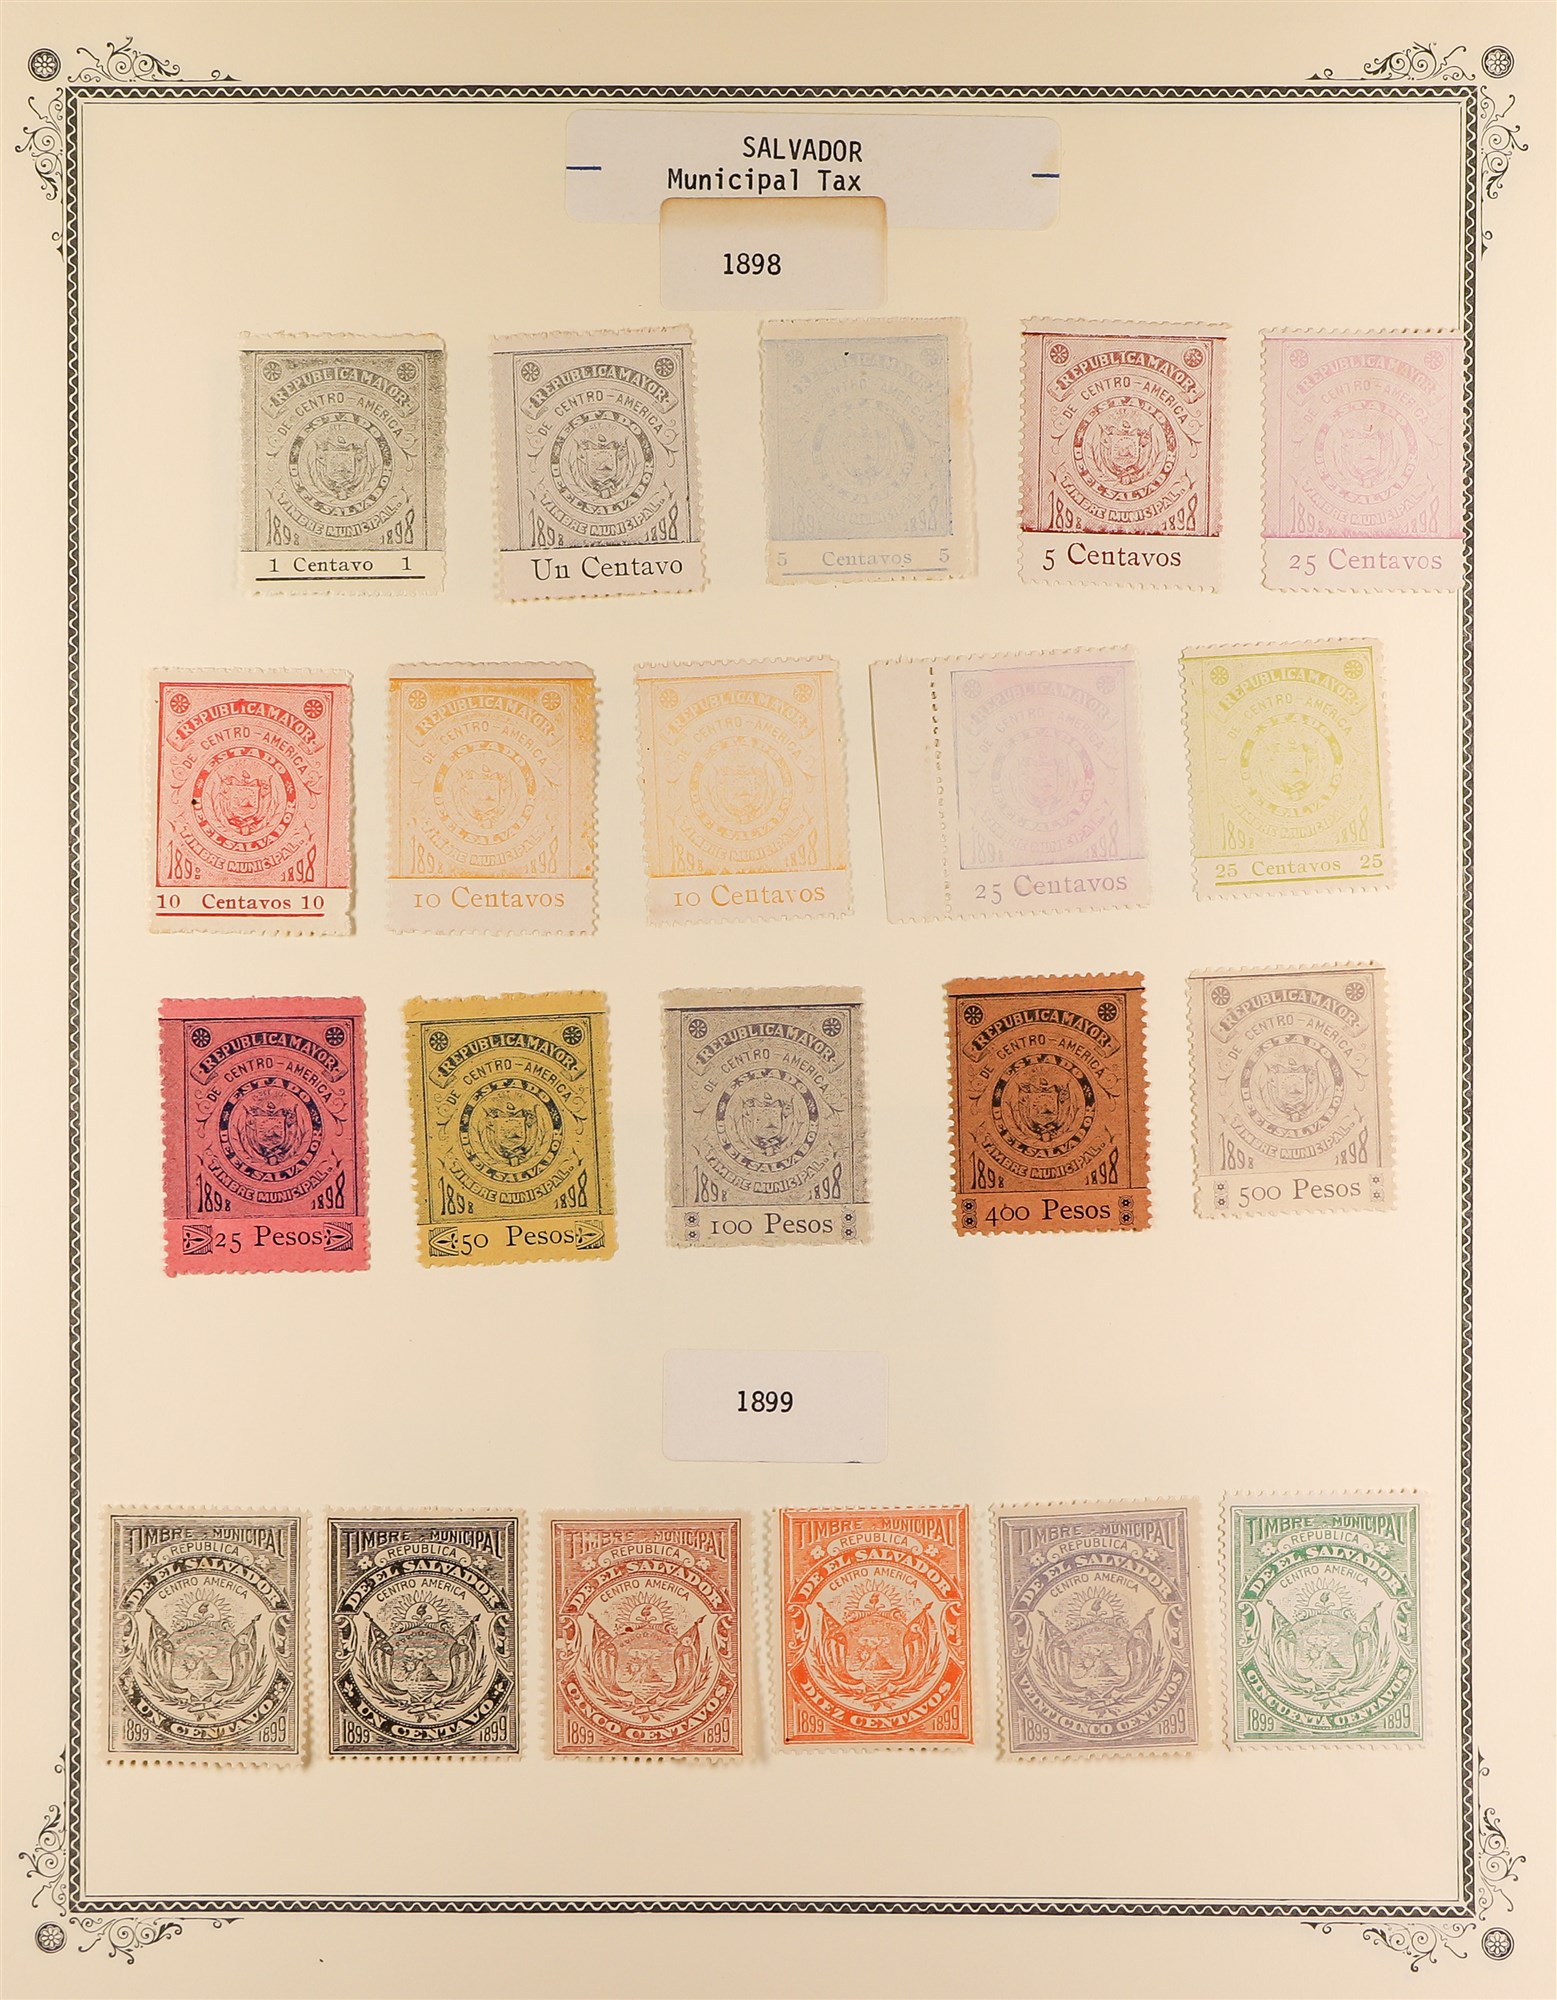 EL SALVADOR REVENUE STAMPS 1883 - 1925 mint & used collection of over 400 revenue stamps, on album - Image 16 of 27